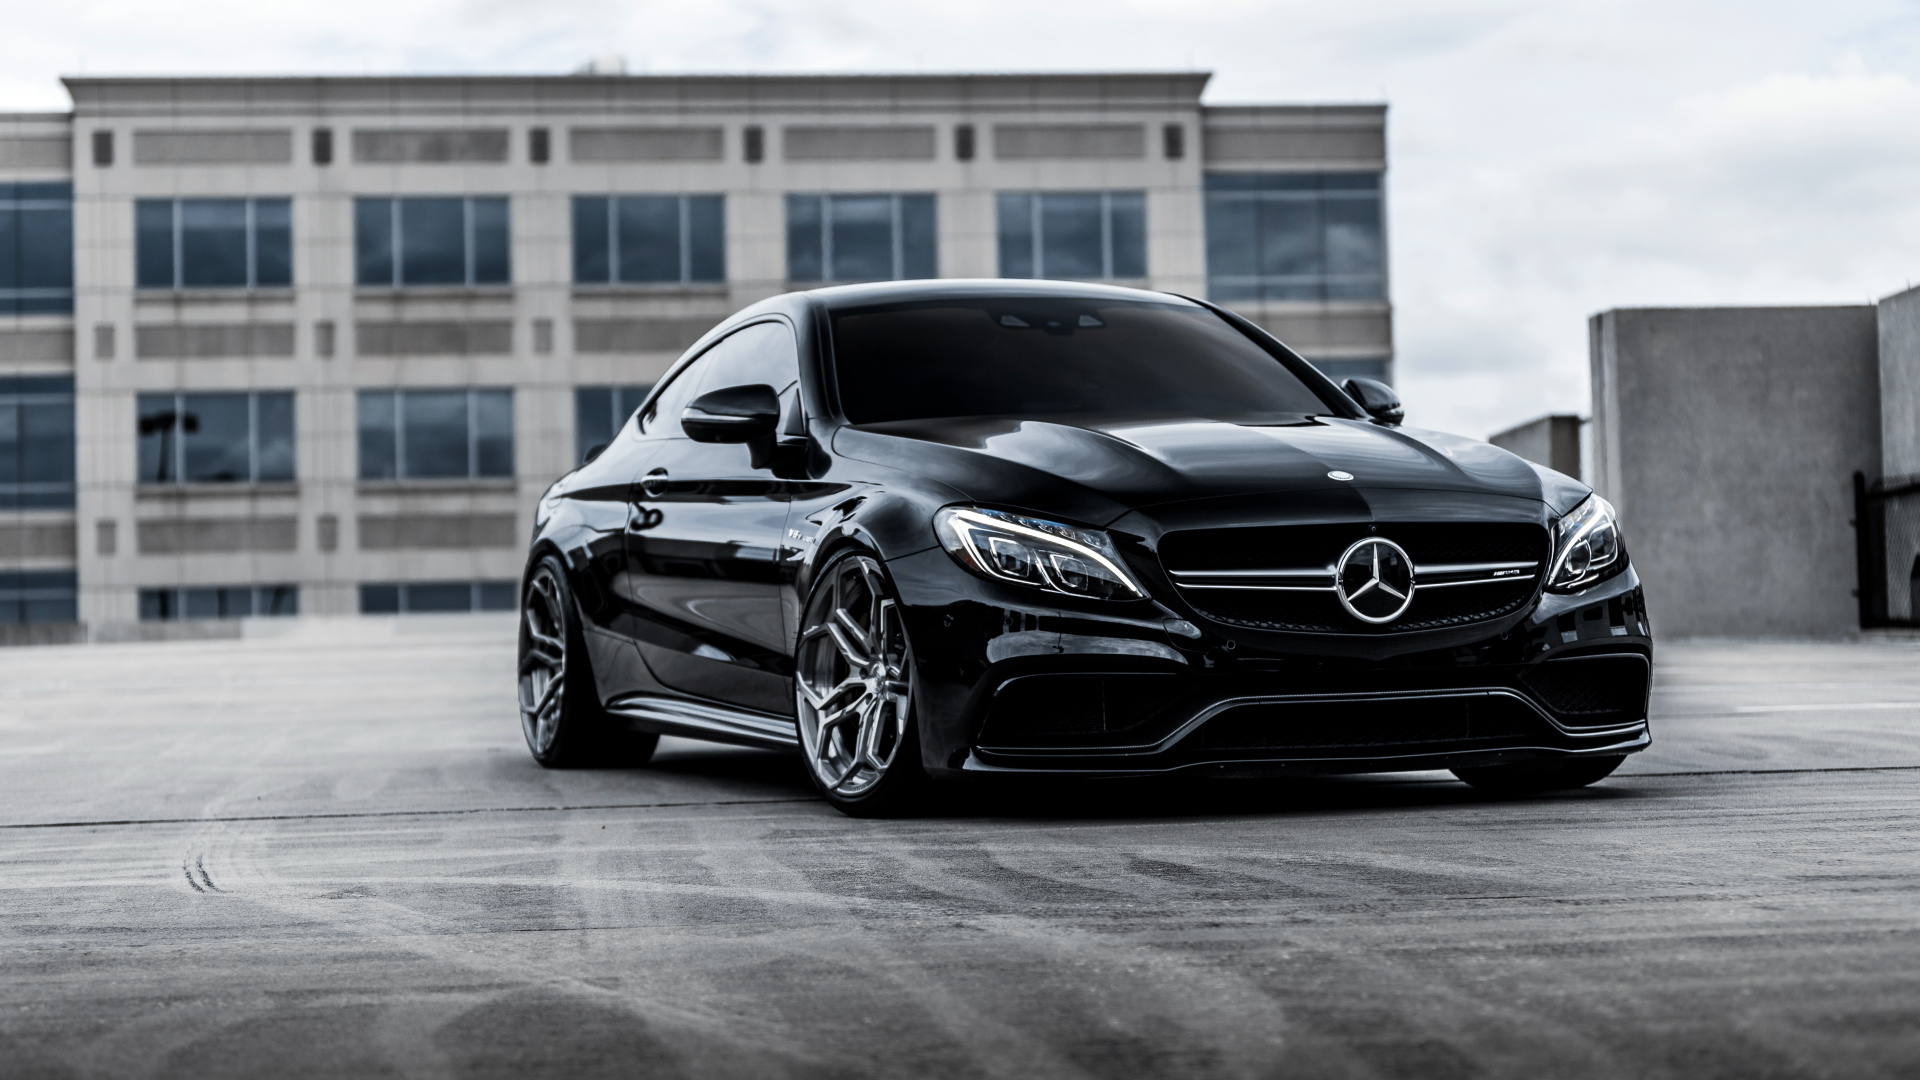 Black Mercedes Benz Coupe in a Room. Wallpaper in 1920x1080 Resolution